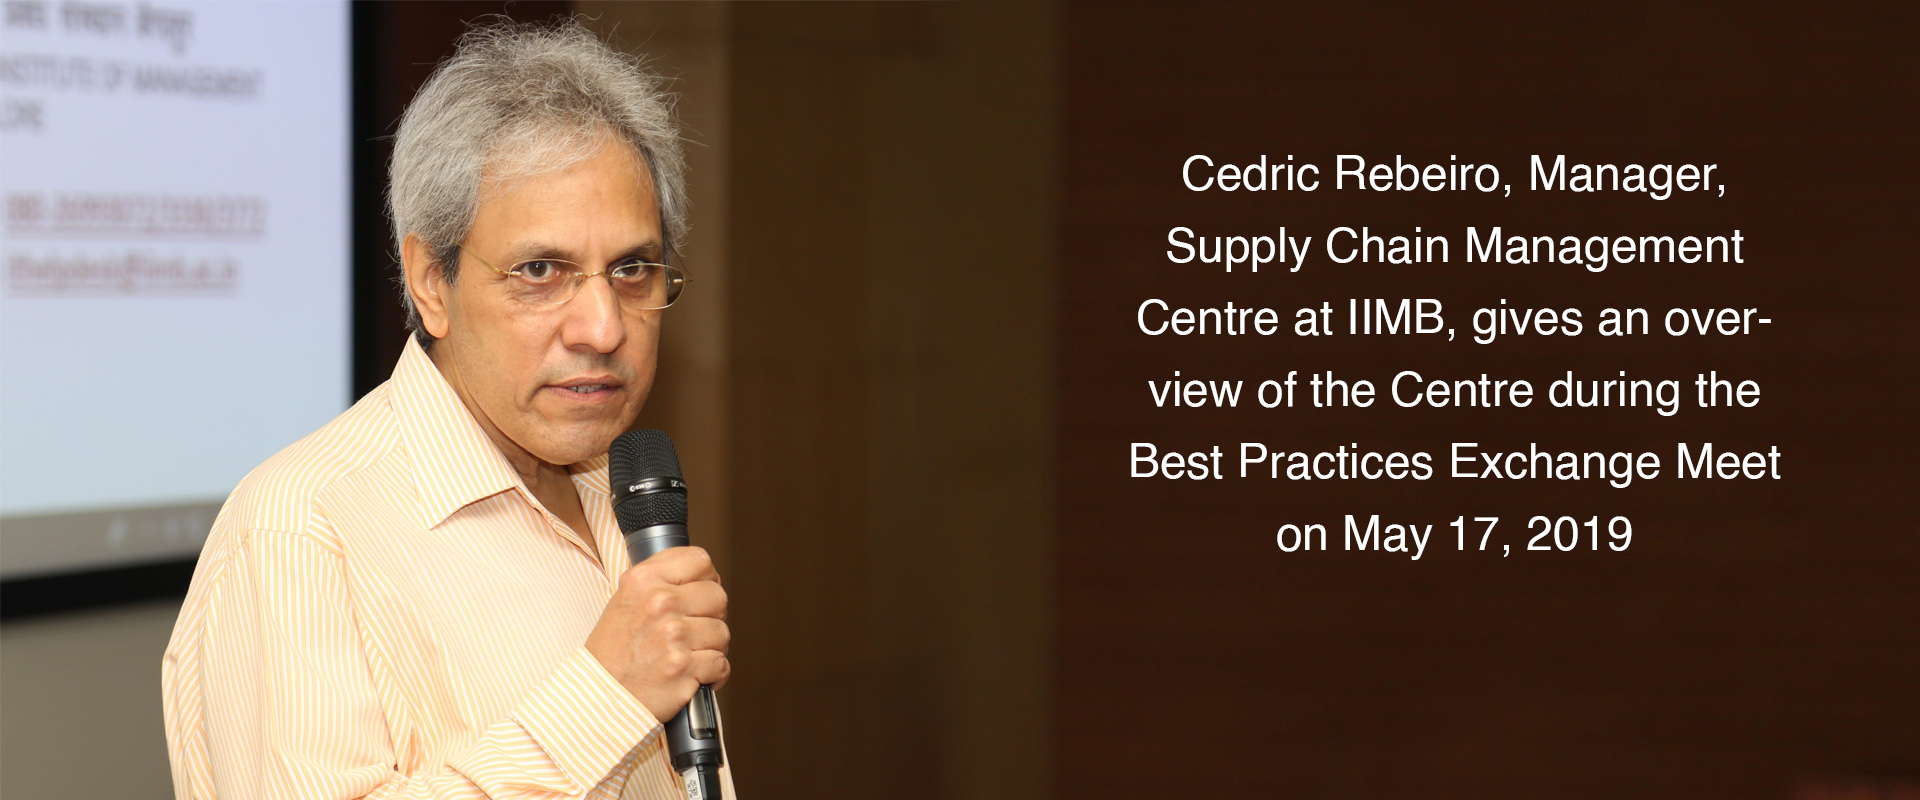 Cedric Rebeiro, Manager, Supply Chain Management Centre at IIMB, gives an overview of the Centre during the Best Practices Exchange Meet on May 17, 2019